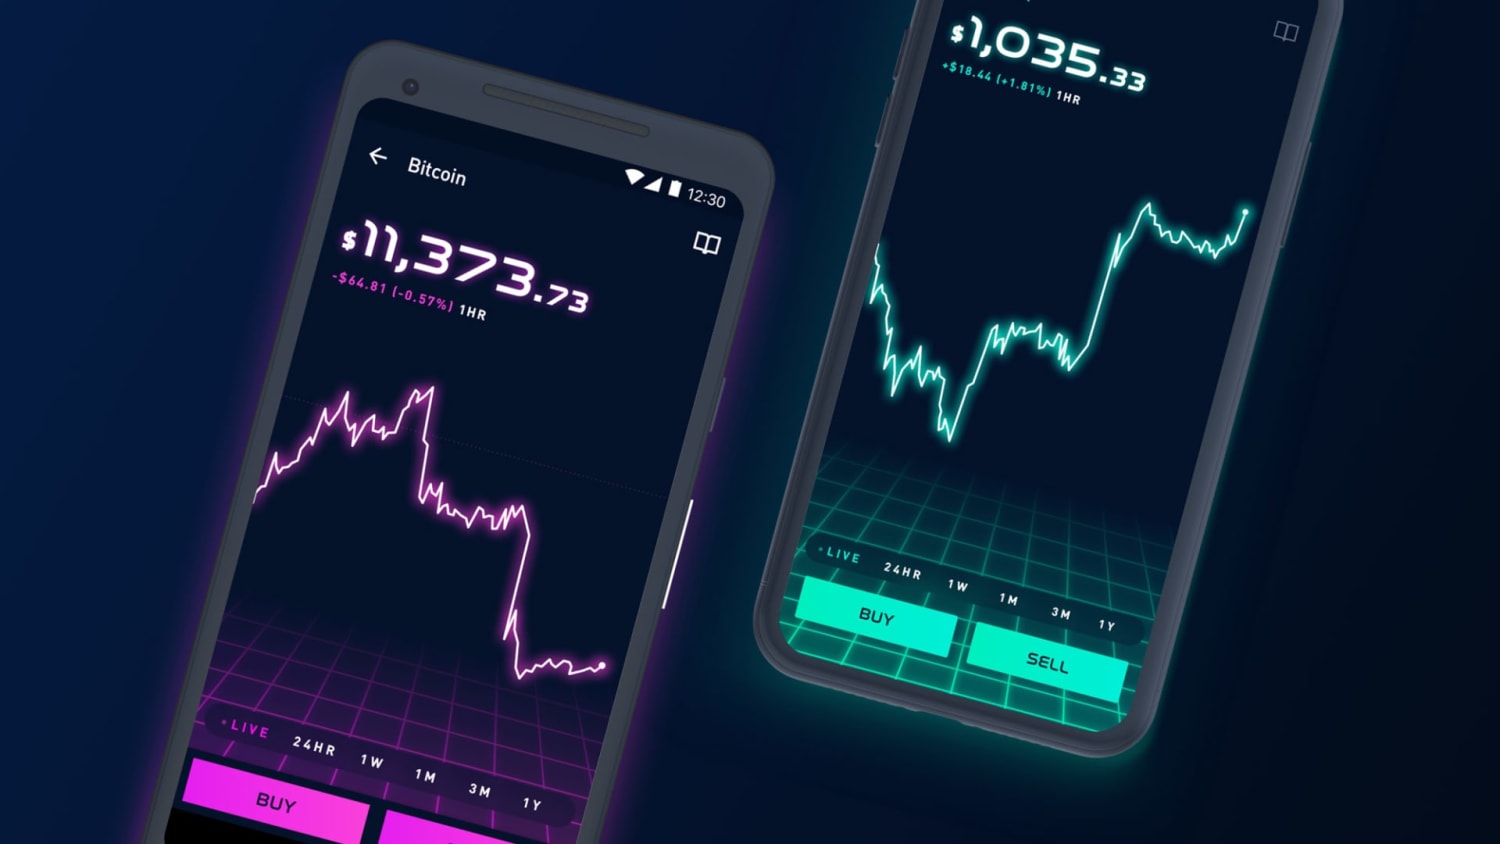 Robinhood: The controversial app worth $5 billion that's trying to upend Wall Street